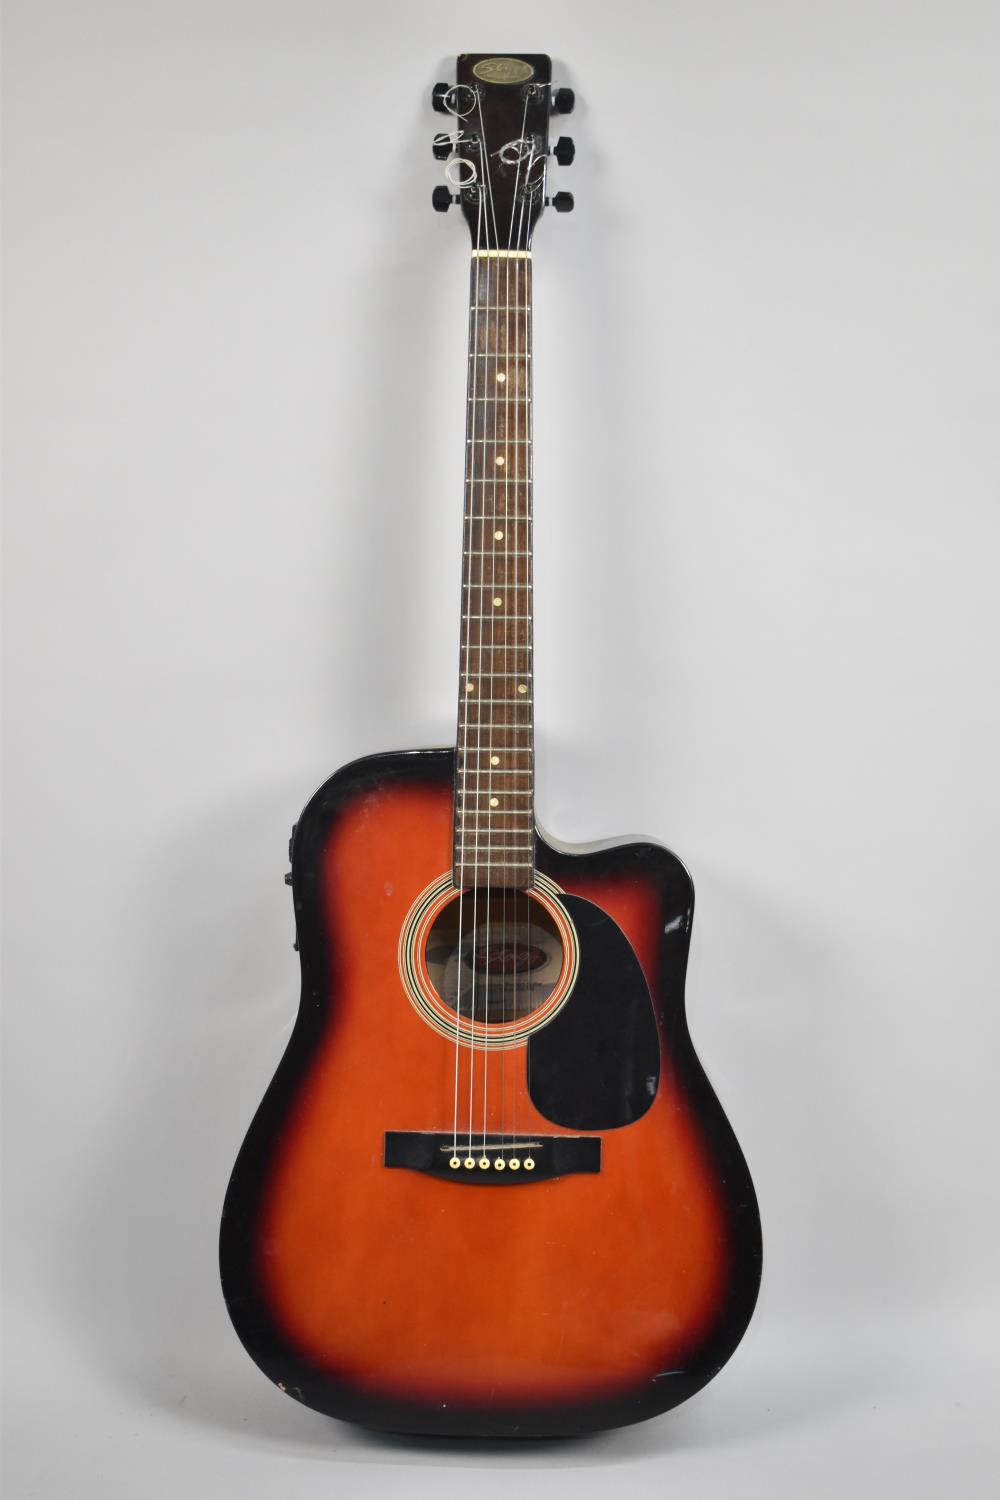 A Stagg Hand Made Western Acoustic Guitar